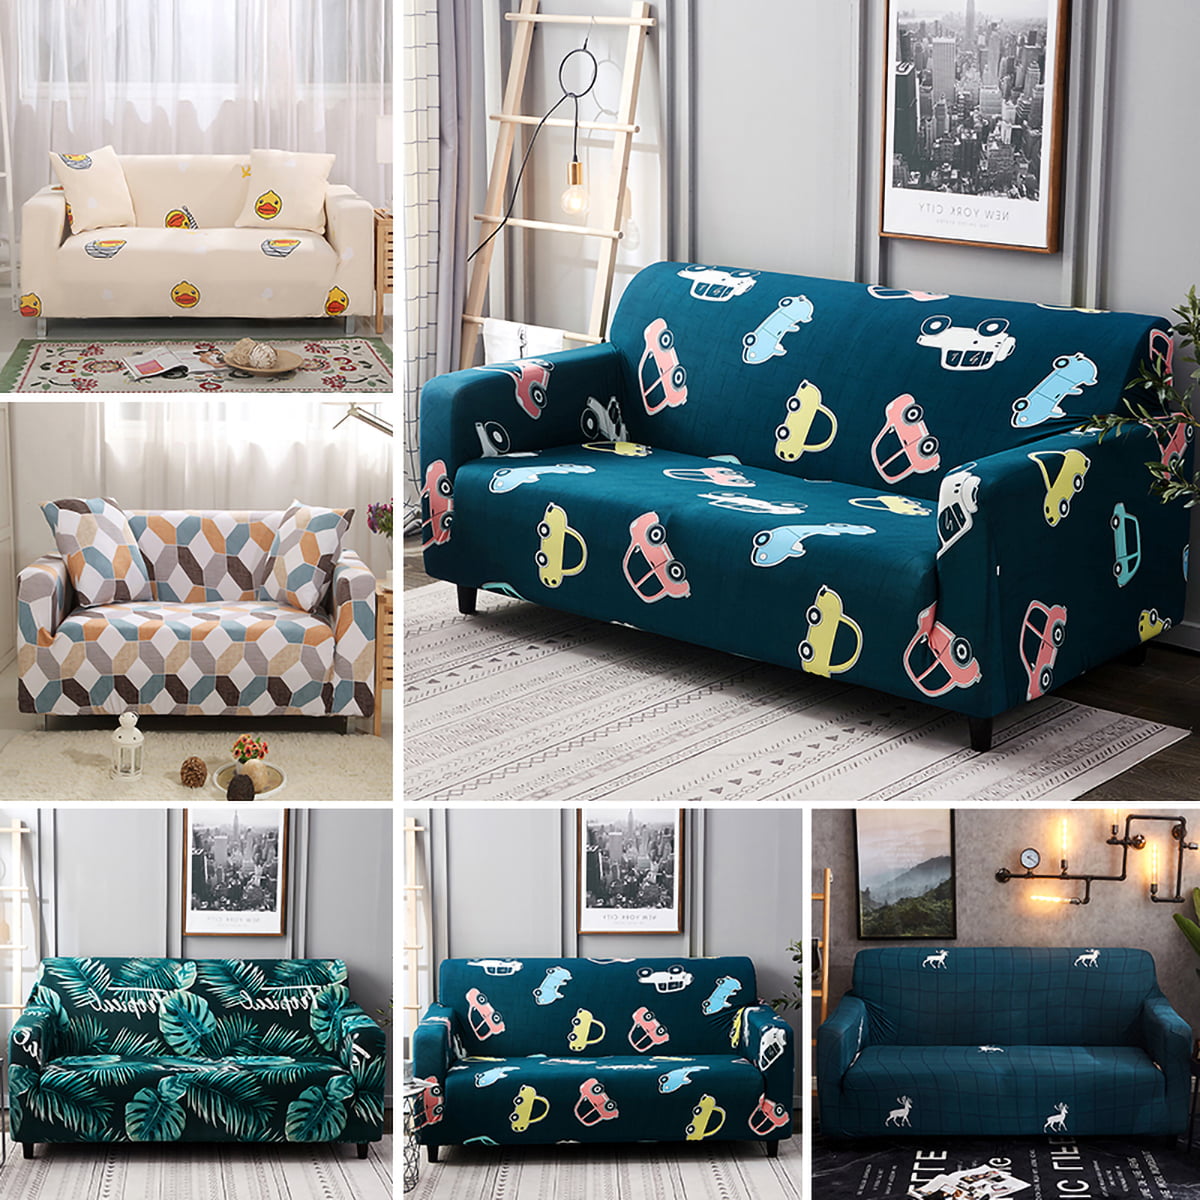 Details about   Stretchy Slipcovers Chair Sofa Cover Printed For Living Room Office Decor 